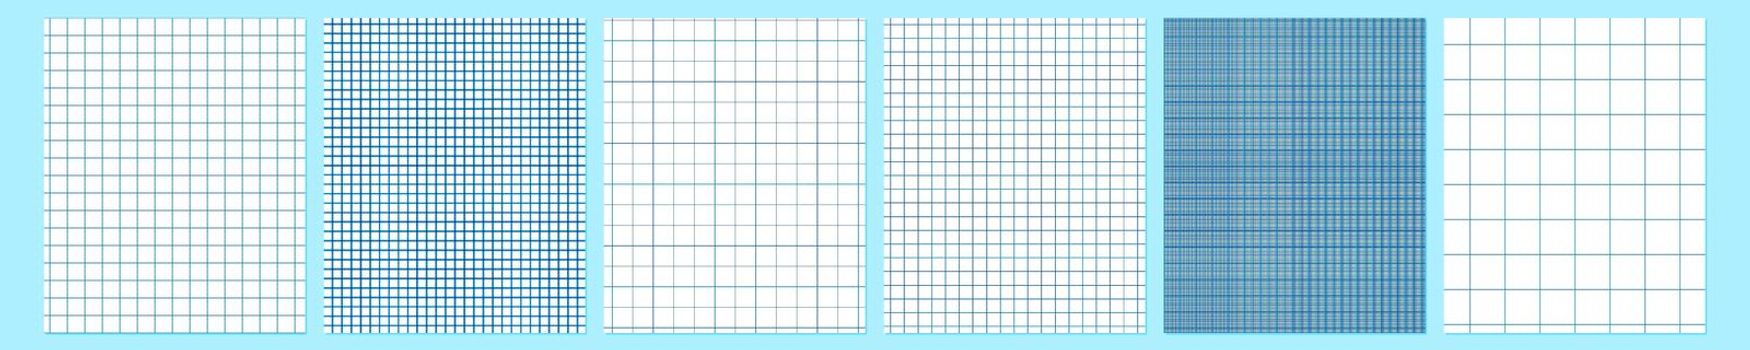 Grid paper set. Abstract squared background with color graph. Geometric pattern for school, wallpaper, textures, notebook. Lined blank A4 isolated on transparent background. Millimeter graph grid.